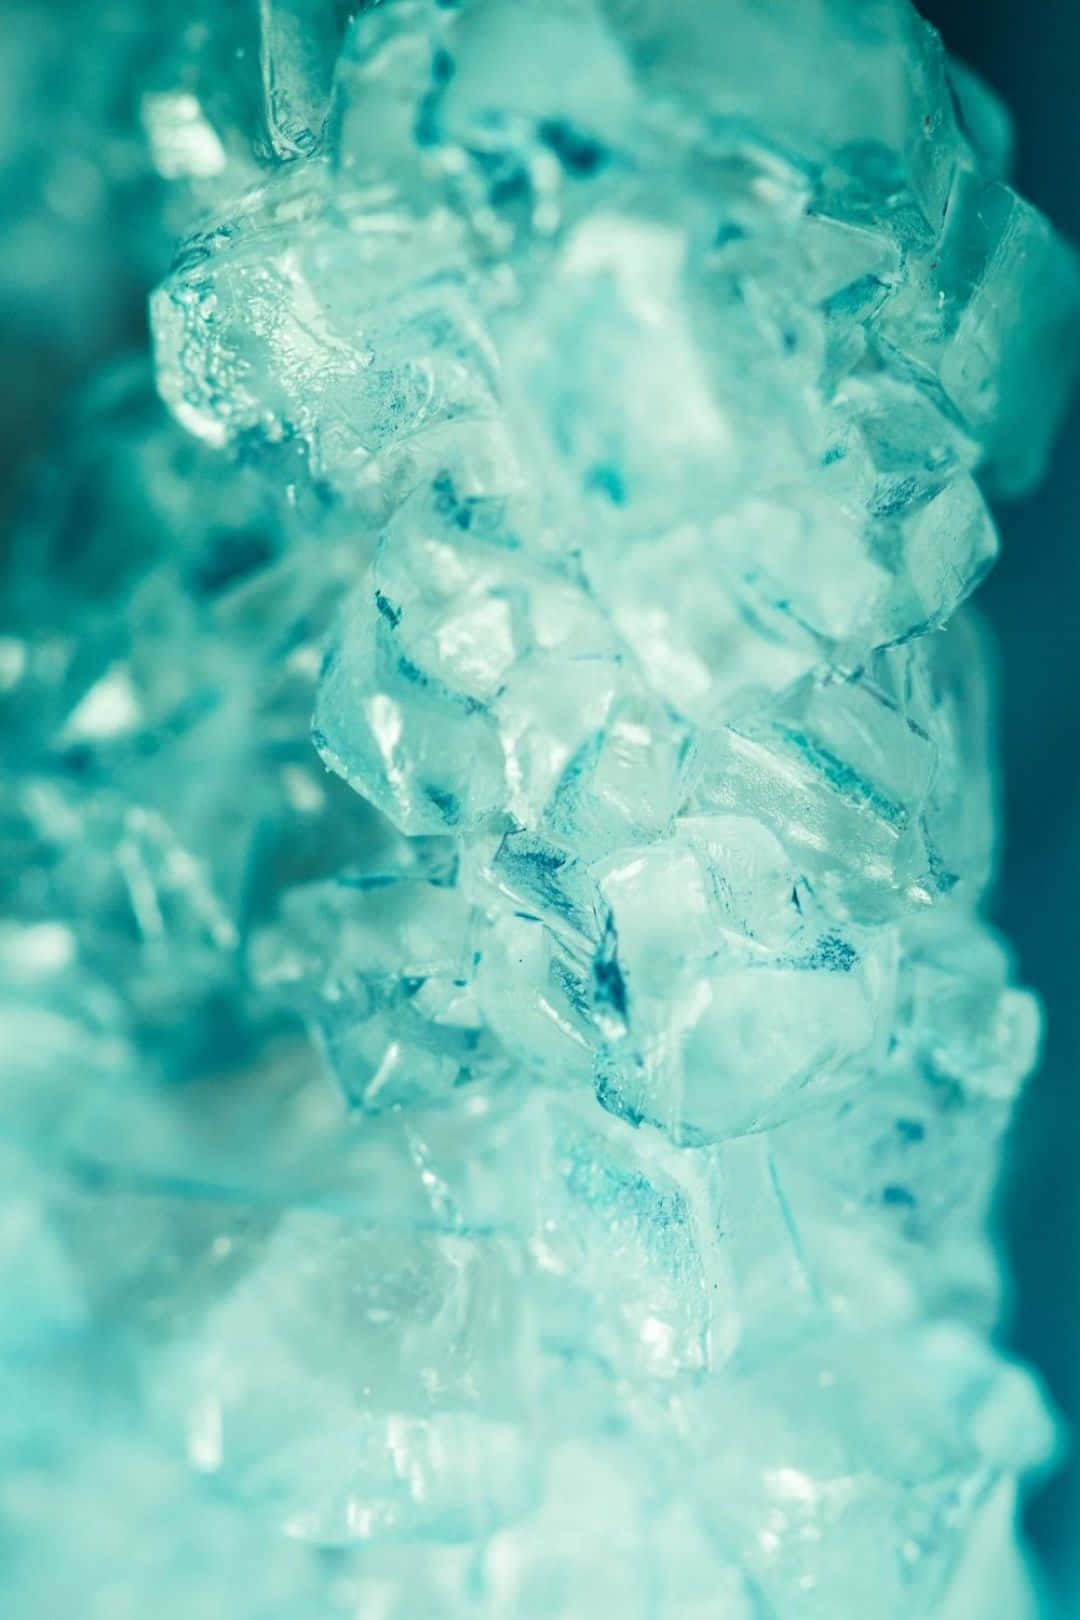 Download A Close Up Of Ice Cubes In A Blue Color Wallpaper | Wallpapers.com